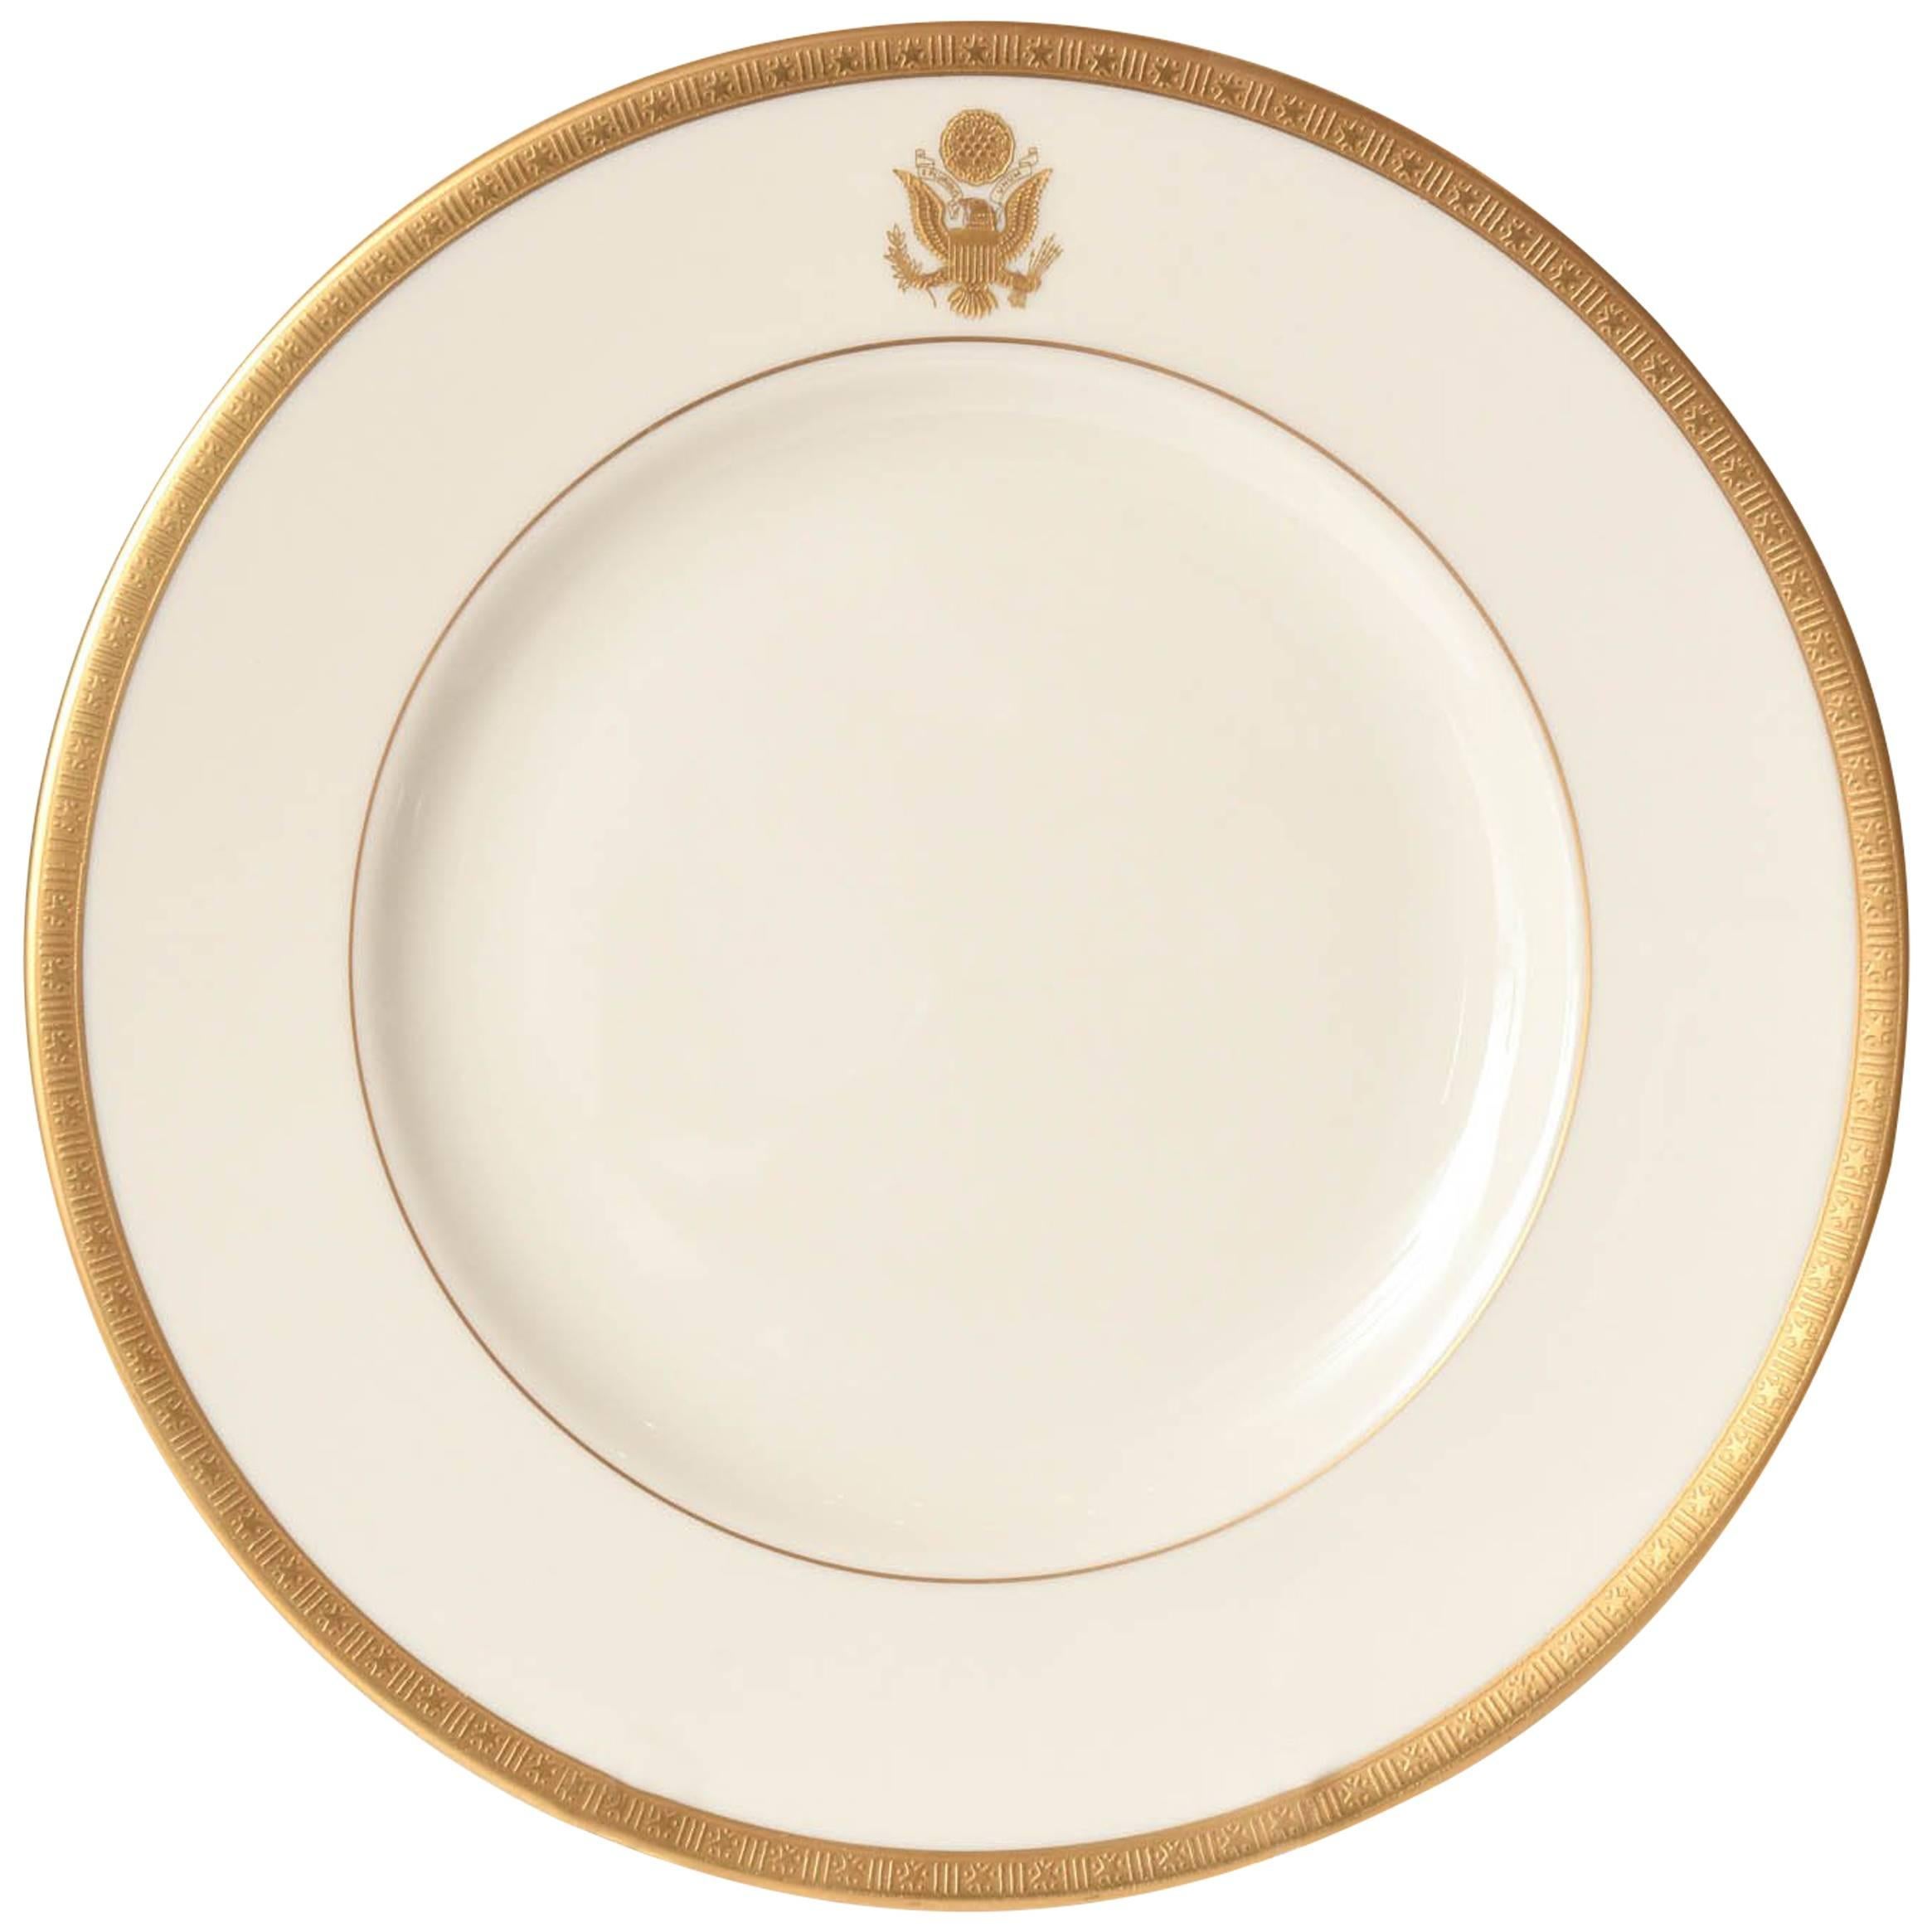 Official US Presidential China , Gilt Embossed Eagle, circa 1927-1960